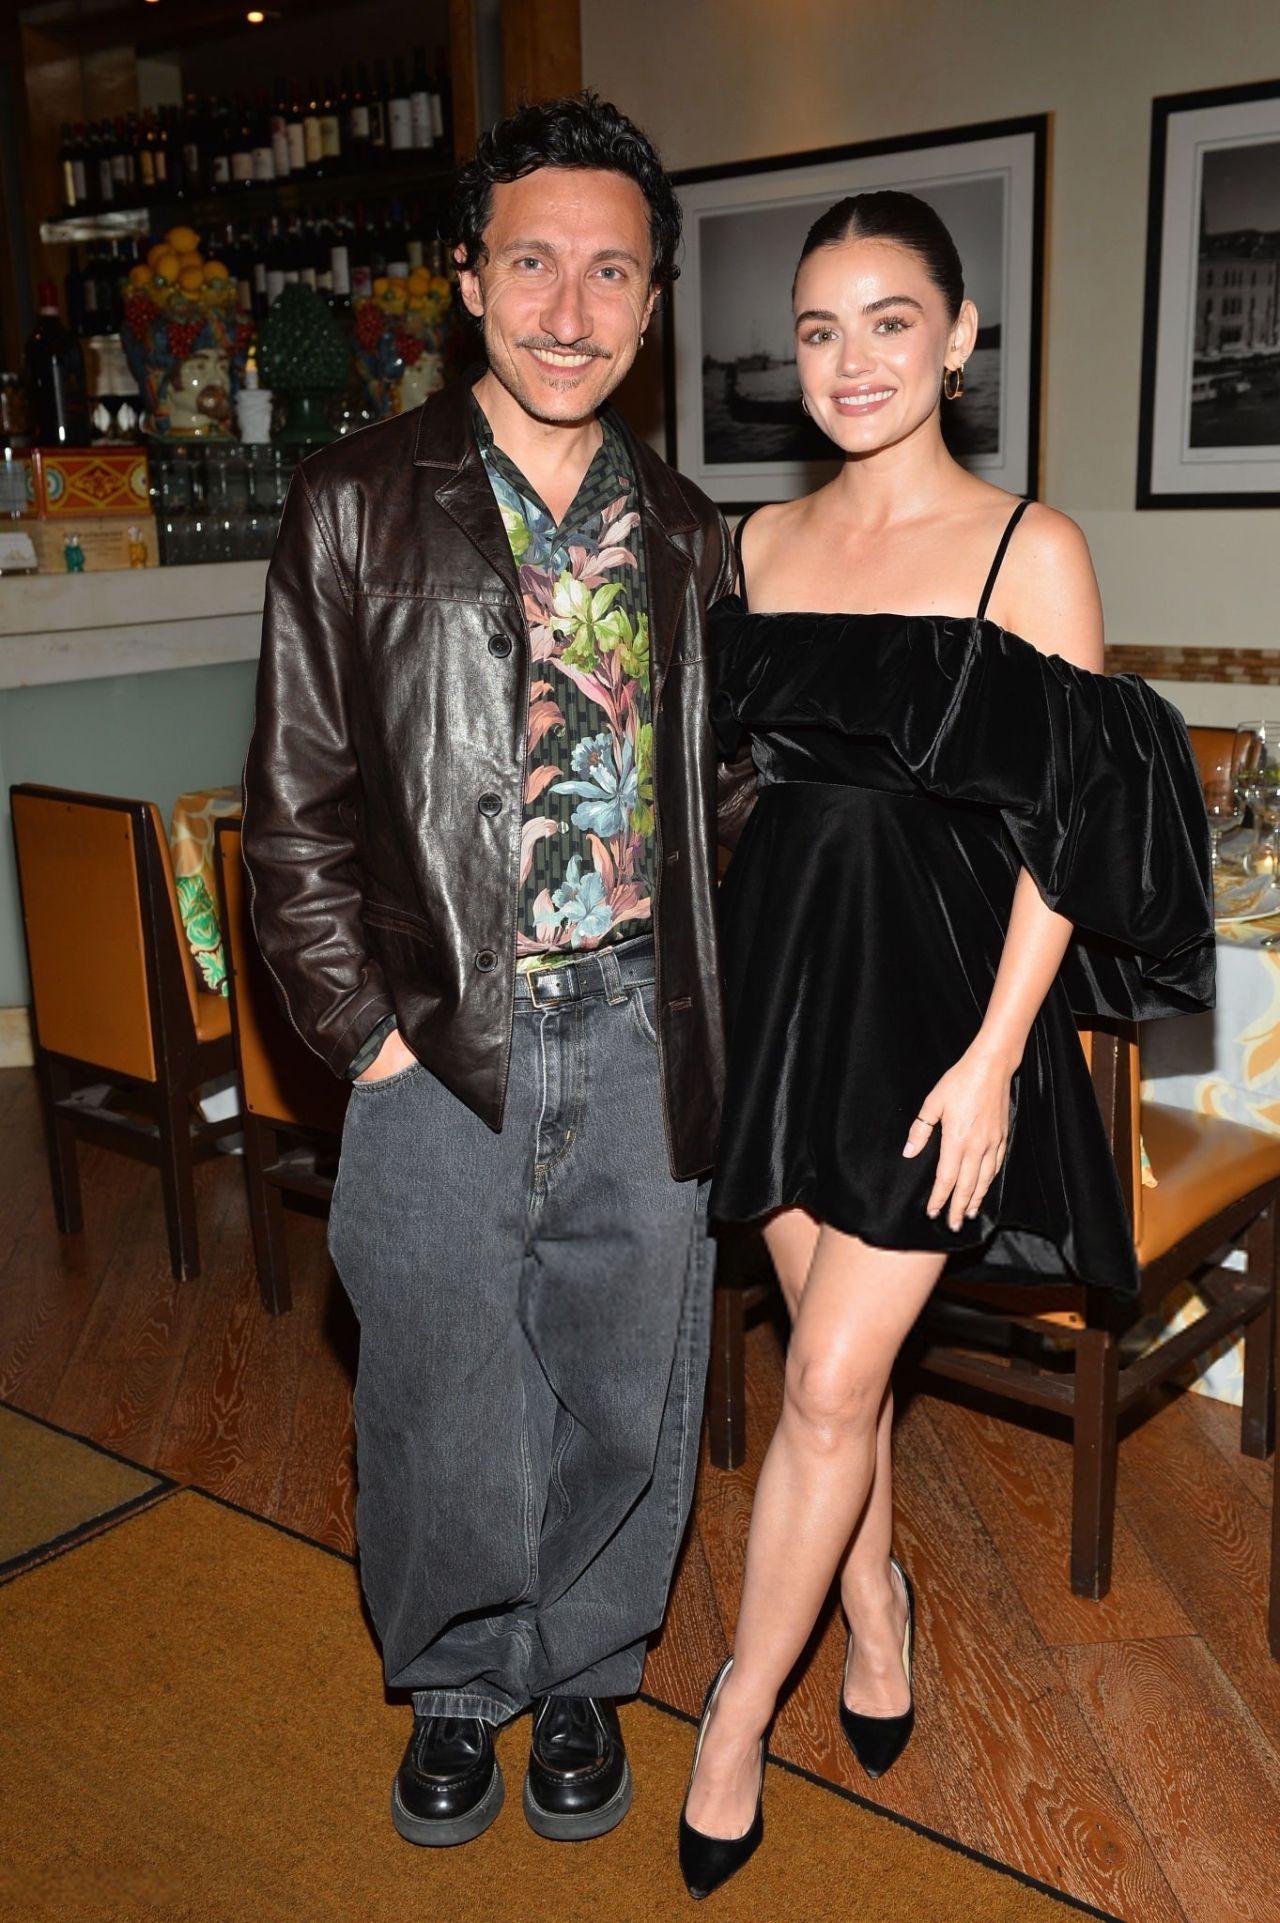 LUCY HALE AT ETRO DINNER LOS ANGELES AT IL SEGRETO RISTORANTE BELAIR IN LOS ANGELES5